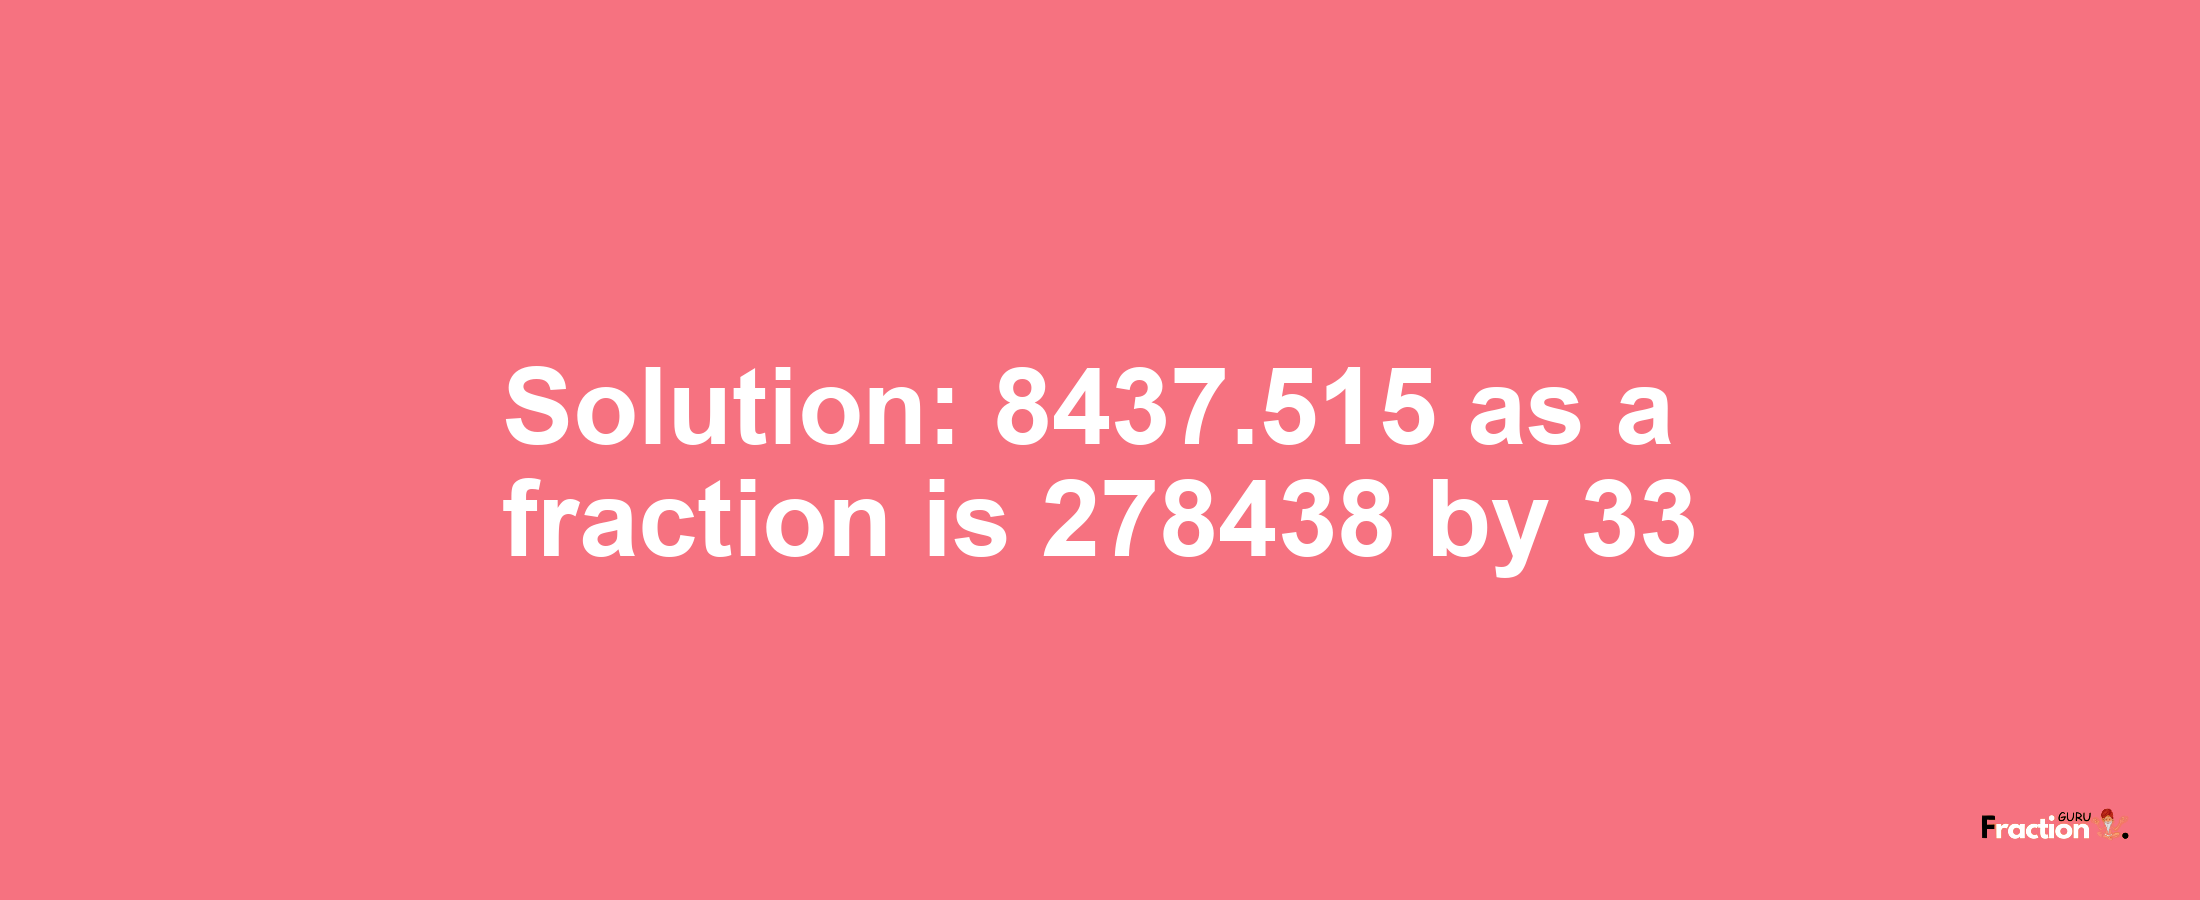 Solution:8437.515 as a fraction is 278438/33